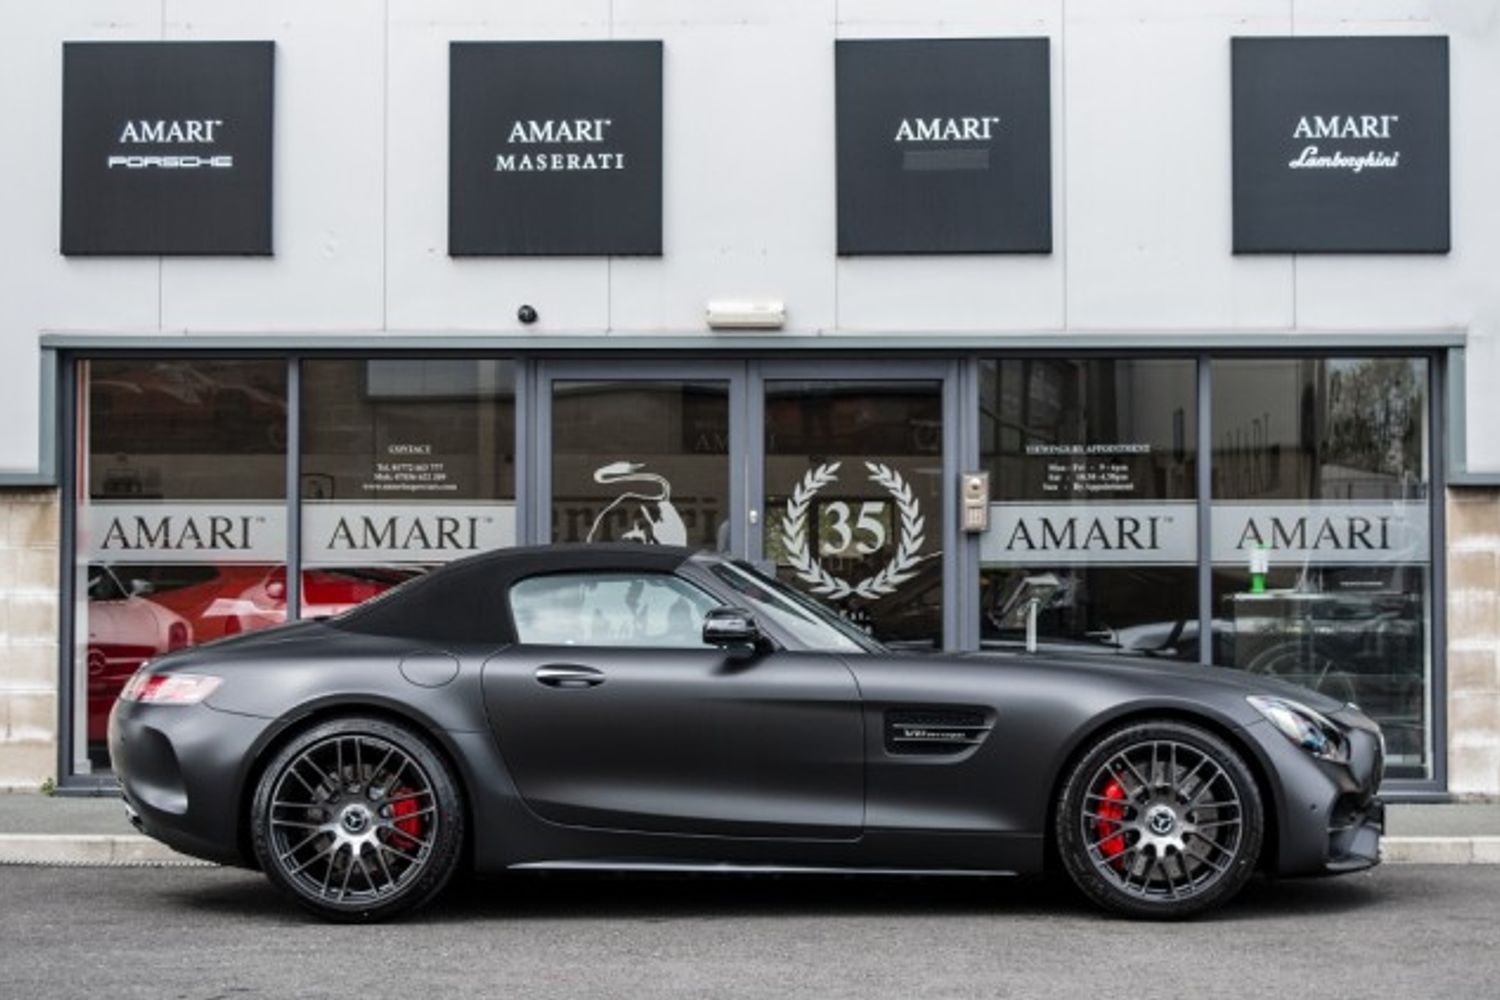 MERCEDES-BENZ GT CONVERTIBLE 4.0 AMG GT C EDITION 50 2DR AUTOMATIC